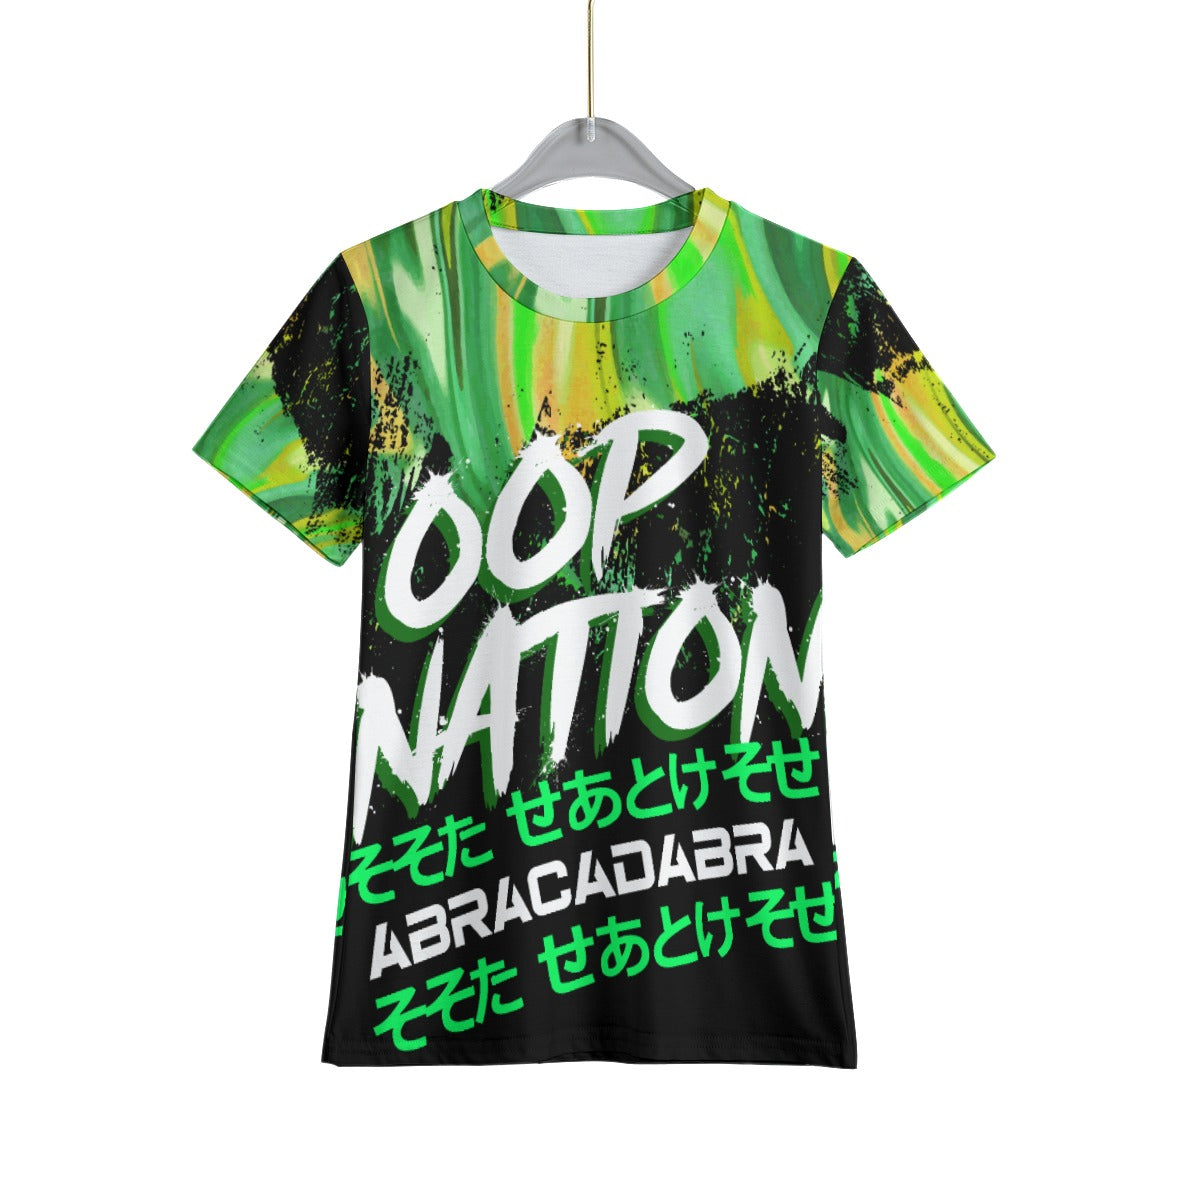 Youth Oop Nation T-Shirt